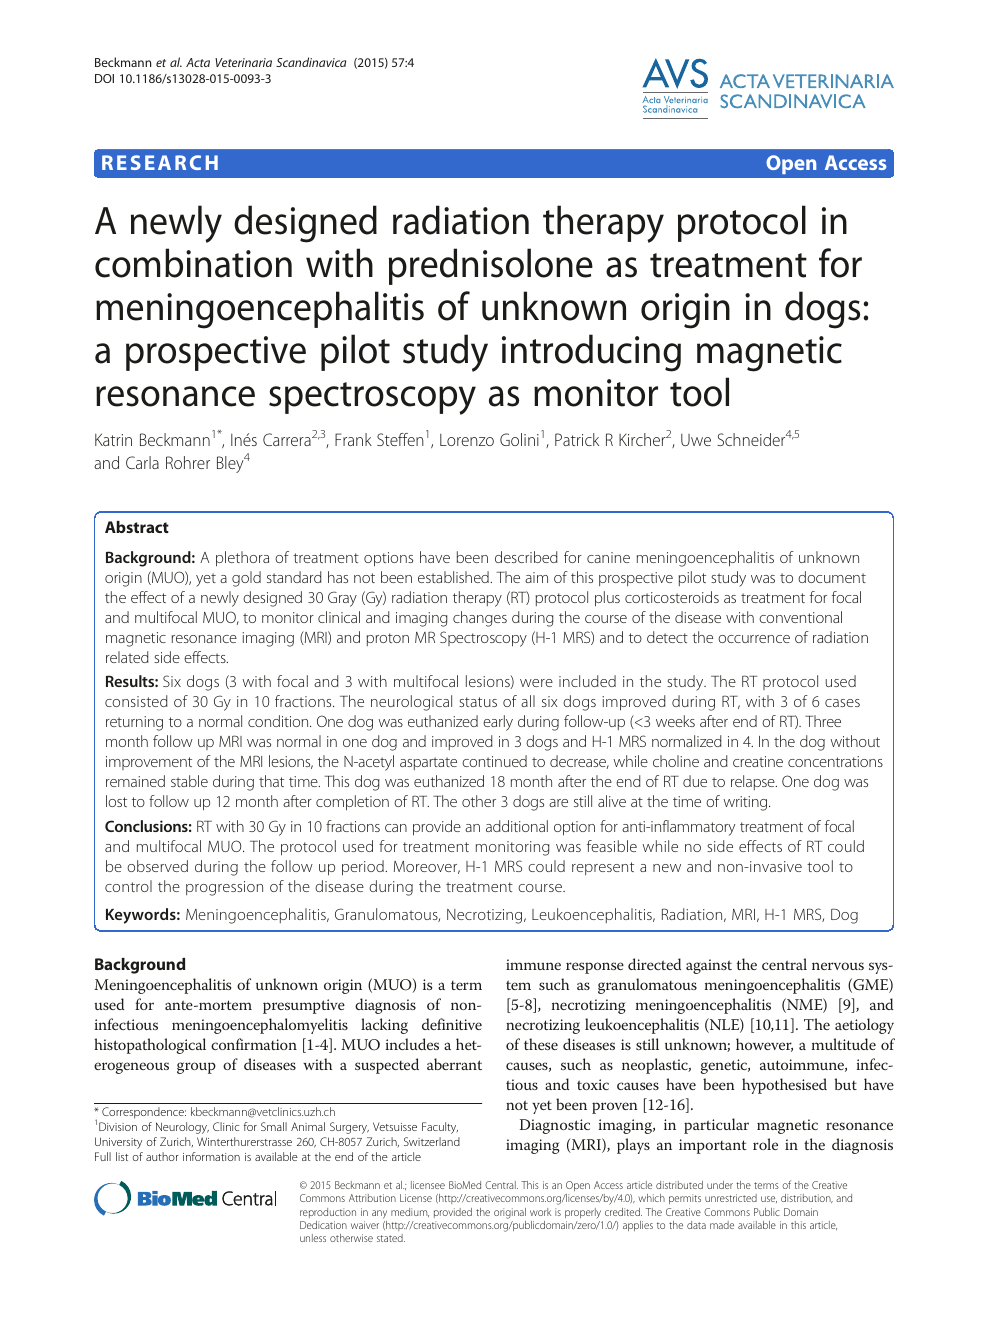 A newly designed radiation therapy protocol in combination with prednisolone as treatment for meningoencephalitis of unknown origin in dogs: a prospective pilot study introducing magnetic resonance spectroscopy as monitor –